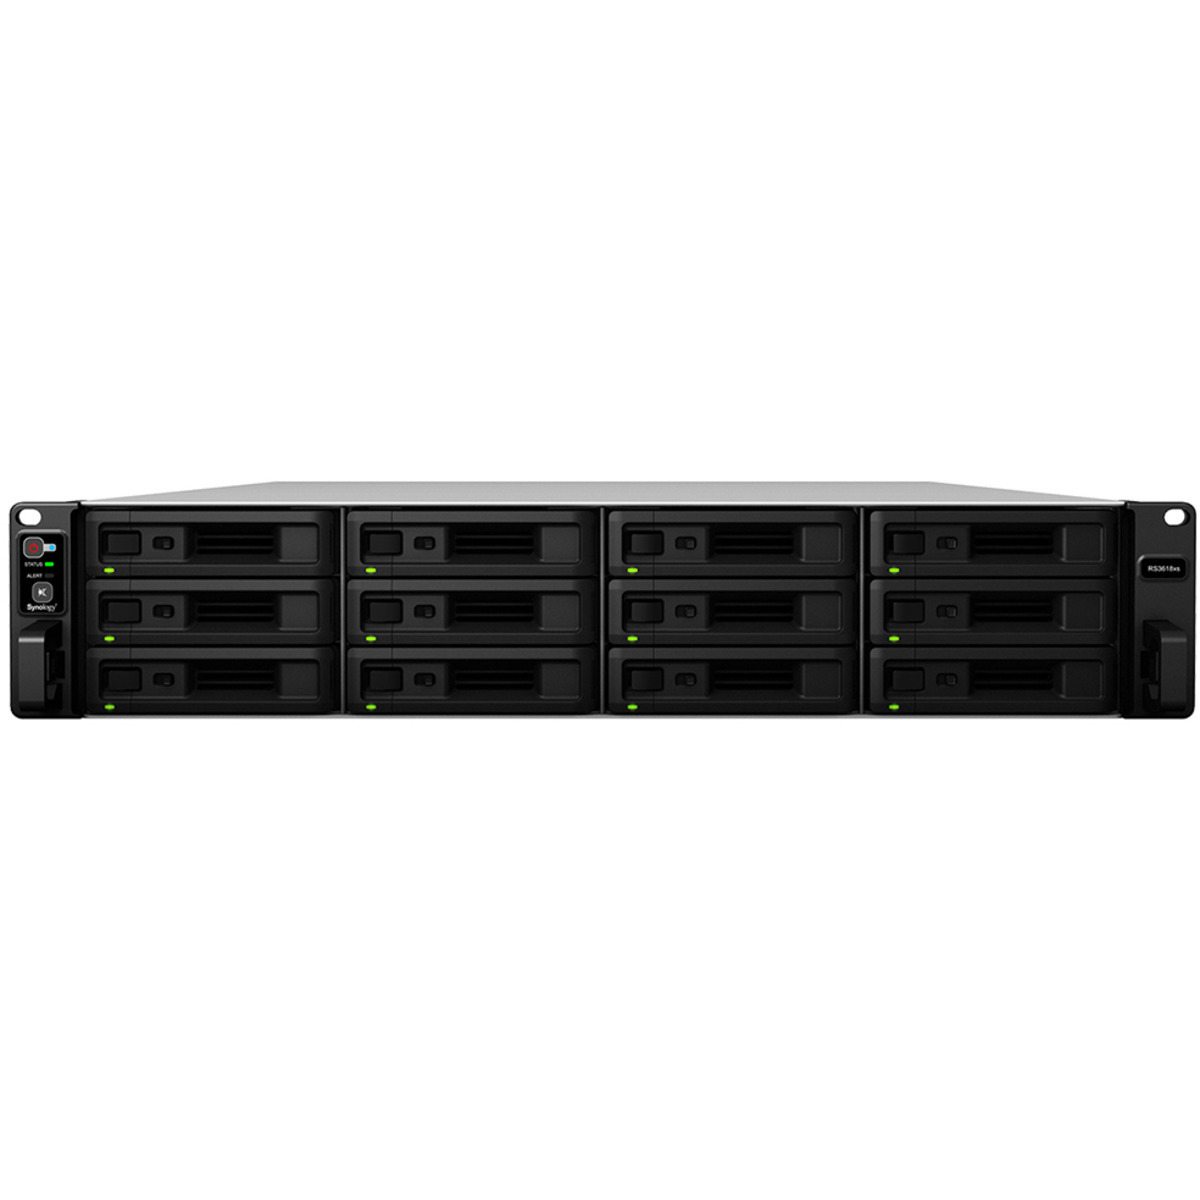 Synology RackStation RS3618xs 96tb 12-Bay RackMount Large Business / Enterprise NAS - Network Attached Storage Device 8x12tb Western Digital Red Plus WD120EFBX 3.5 7200rpm SATA 6Gb/s HDD NAS Class Drives Installed - Burn-In Tested RackStation RS3618xs